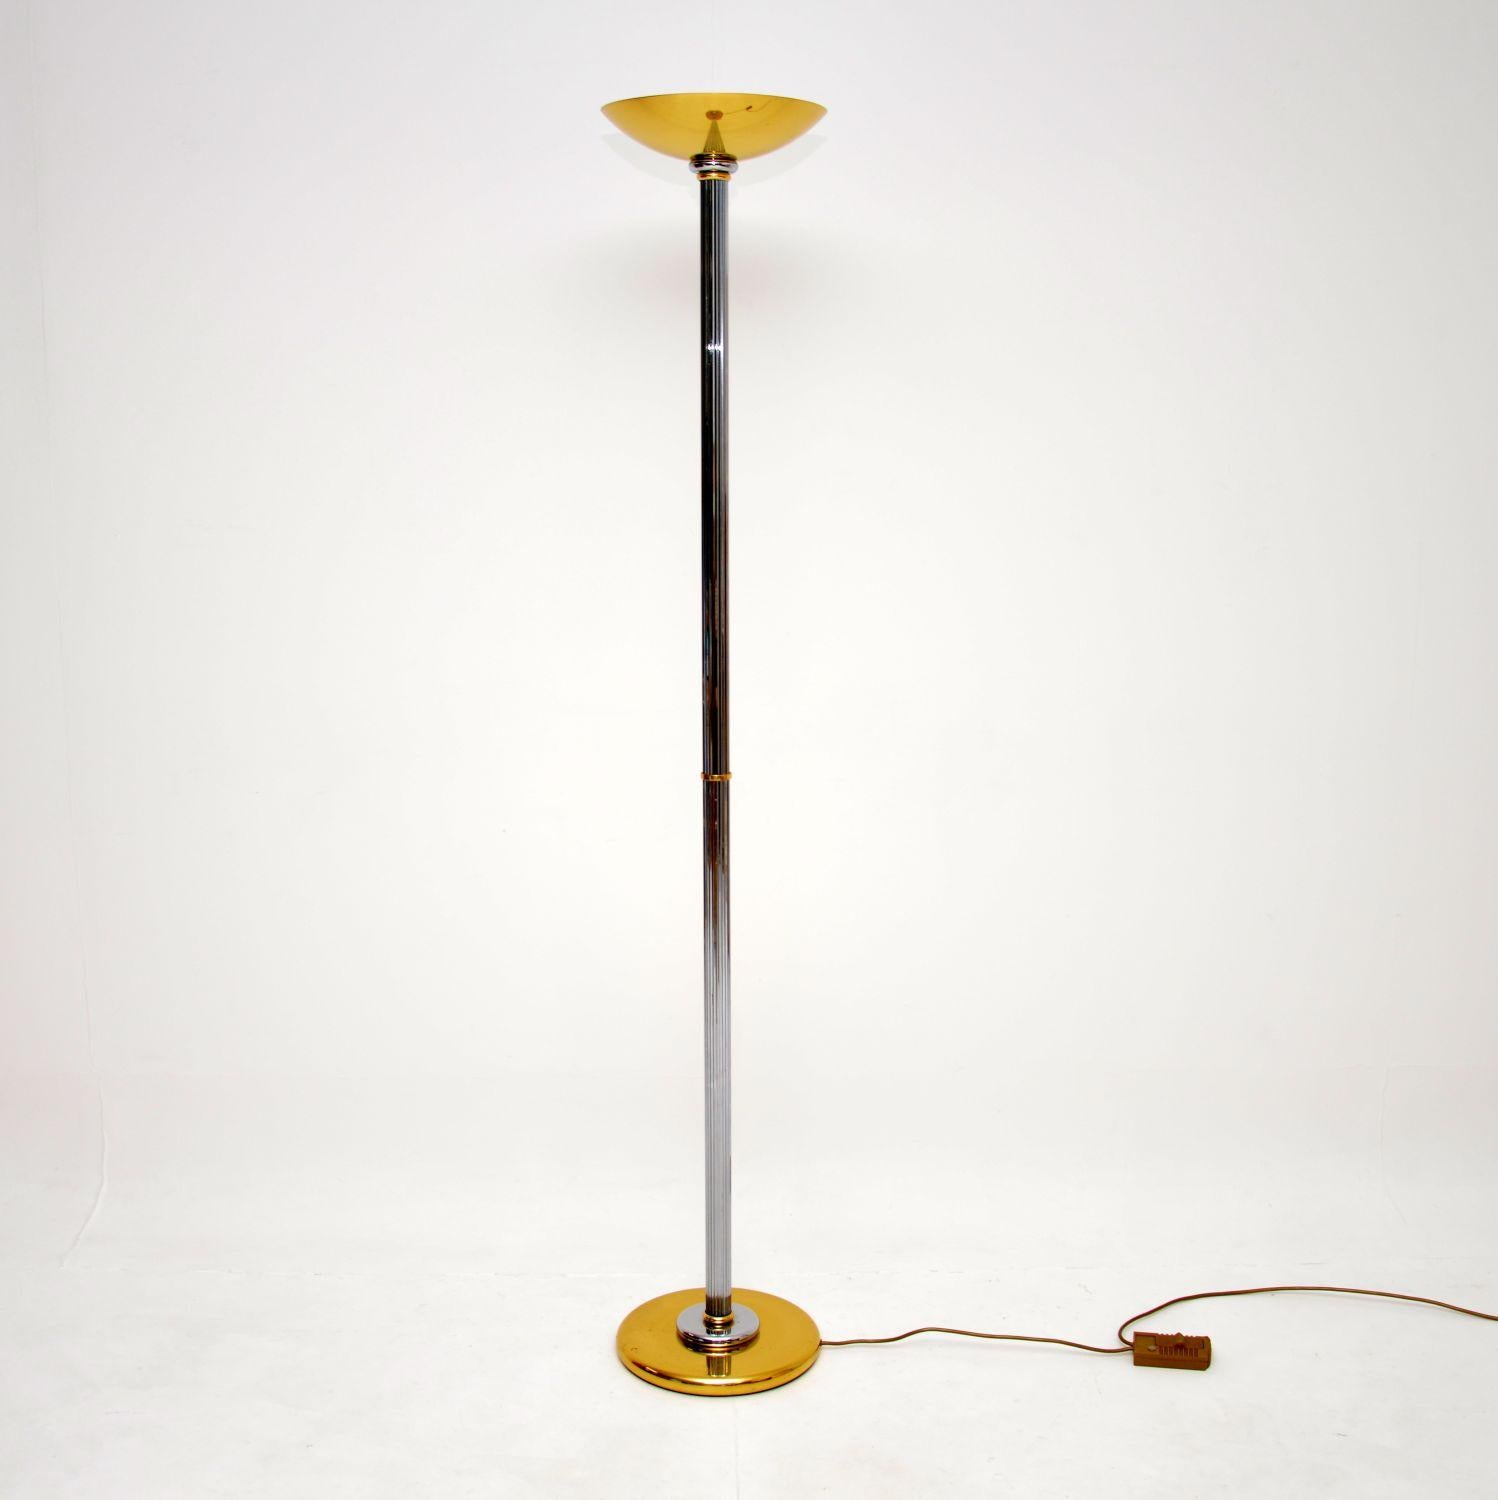 A fantastic vintage French floor lamp by Le Dauphin, dating from the 1970’s.

This is of superb quality, the shade and the base are brass, the fluted column is chromed steel.

This is in excellent condition for its age, with only some extremely